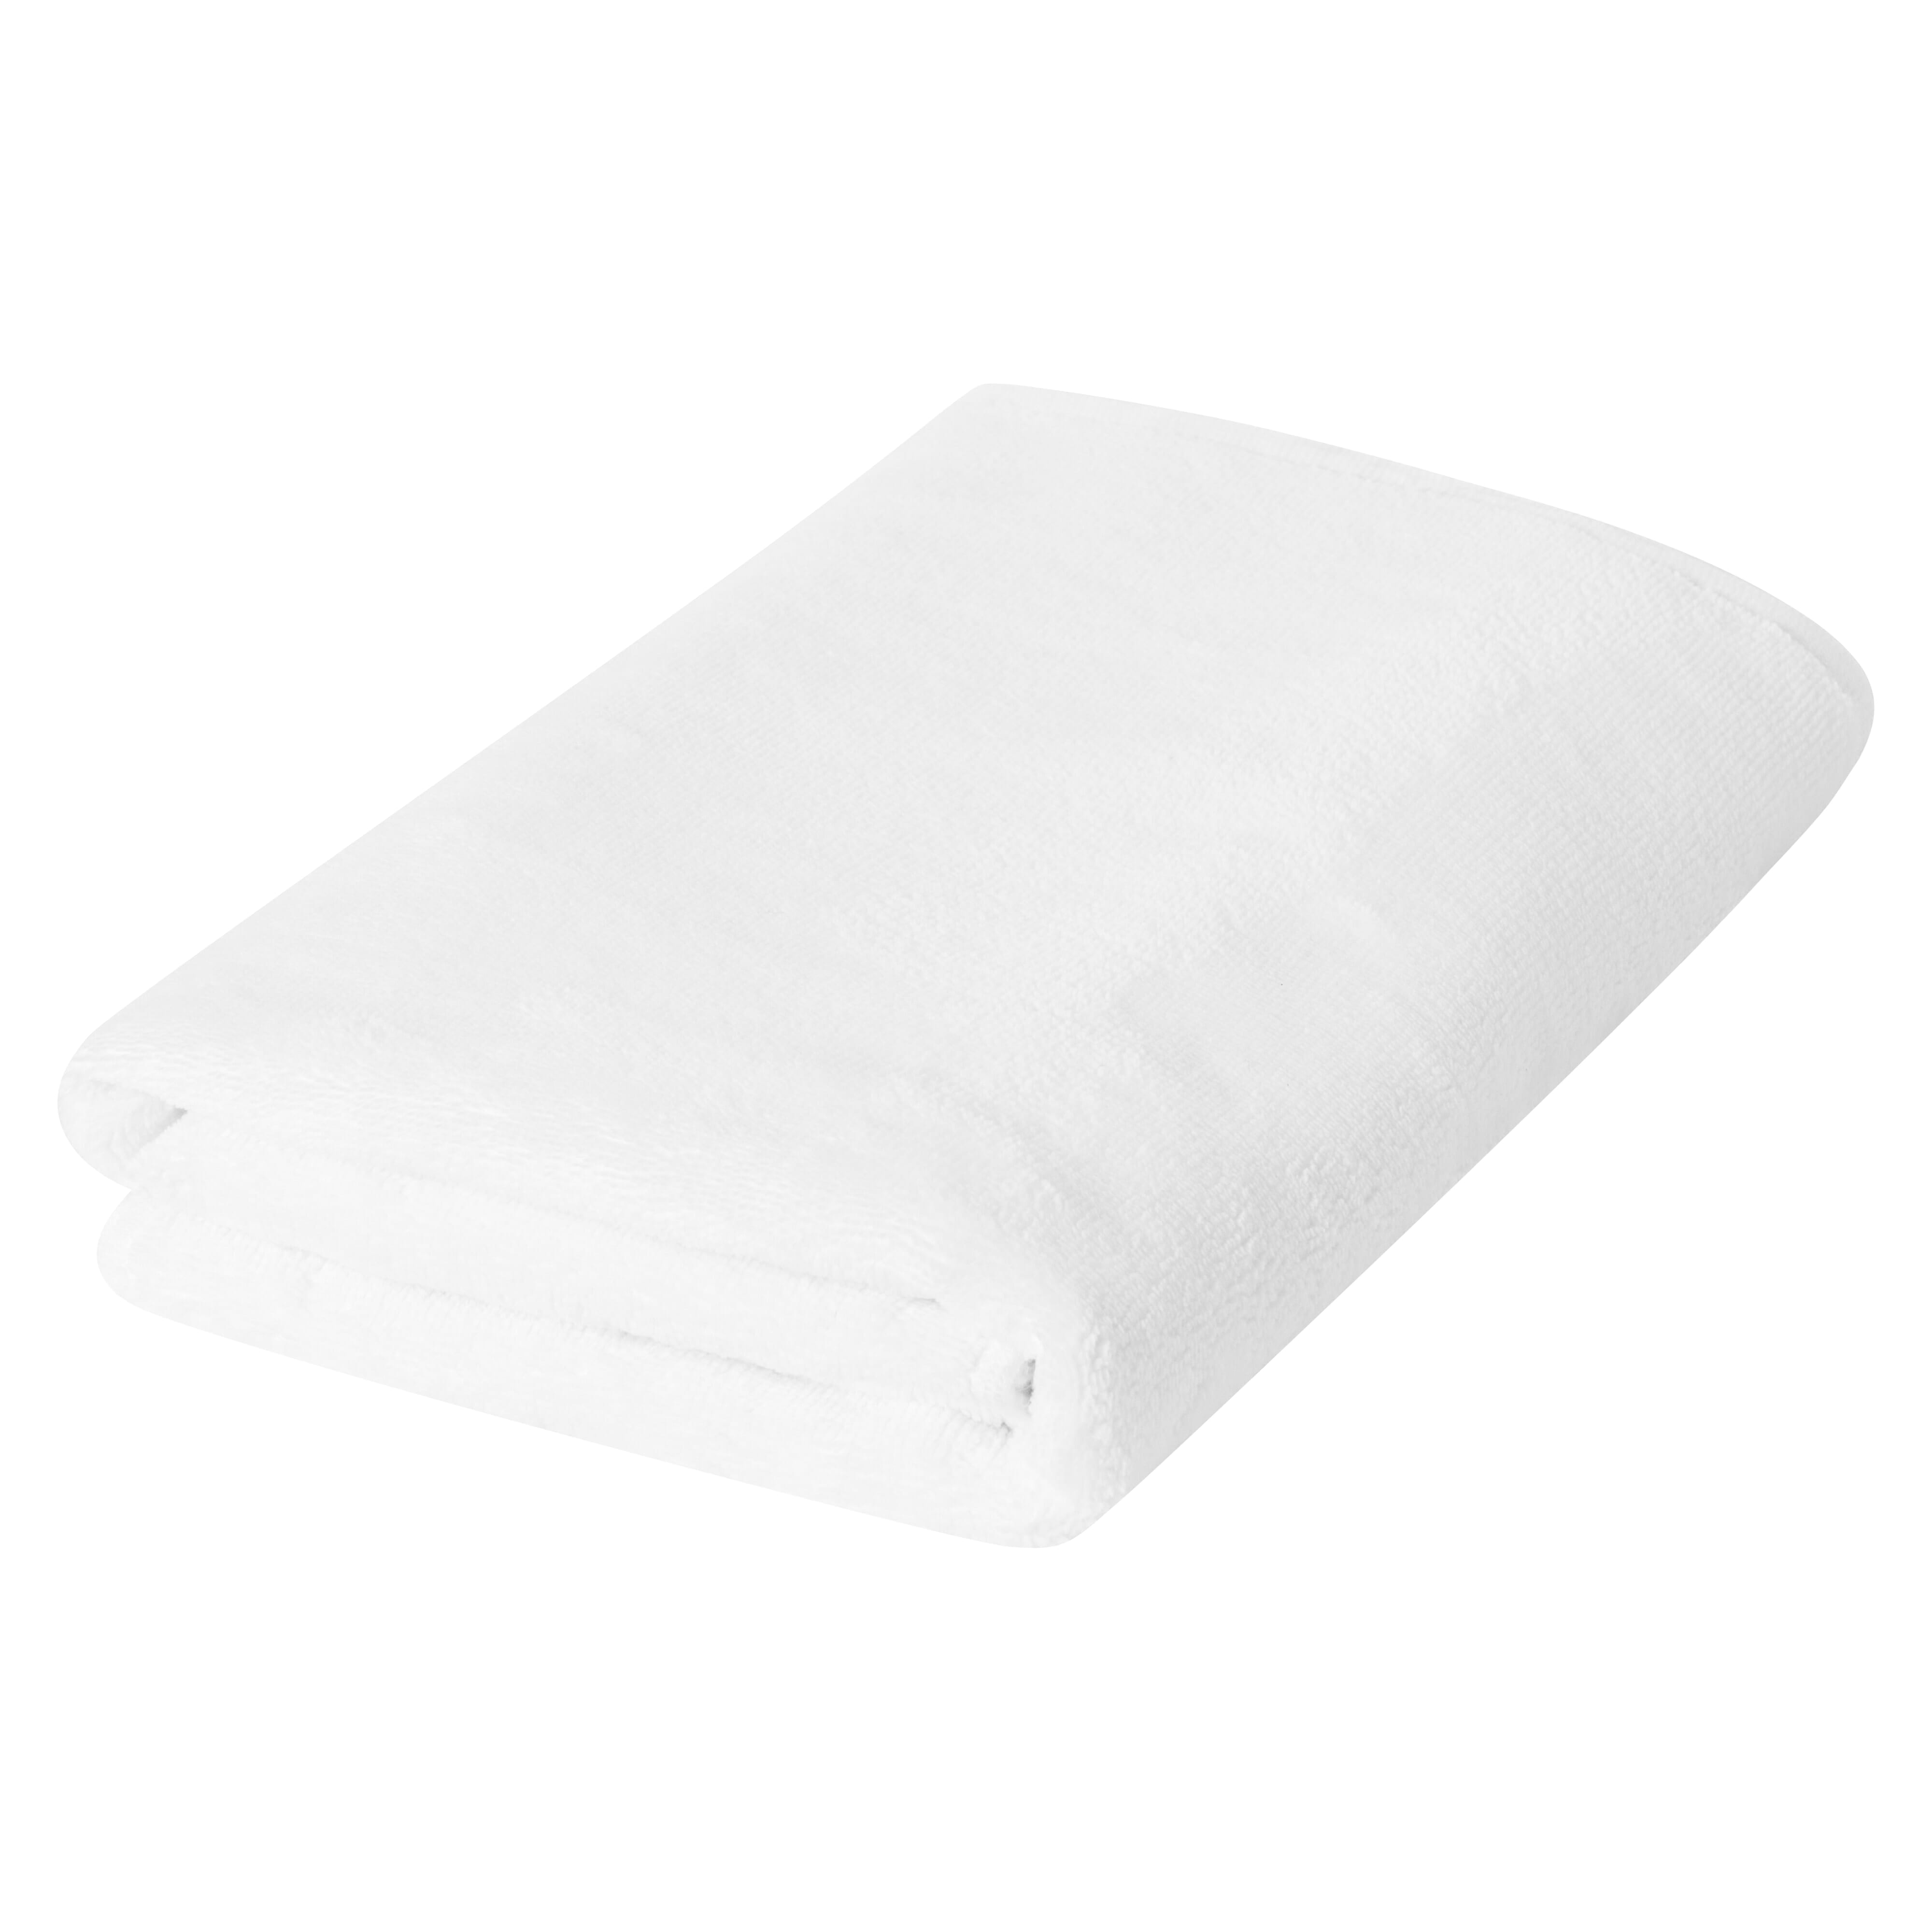 Double-Sided Bath Towel - White - Acton Burnell - Weymouth